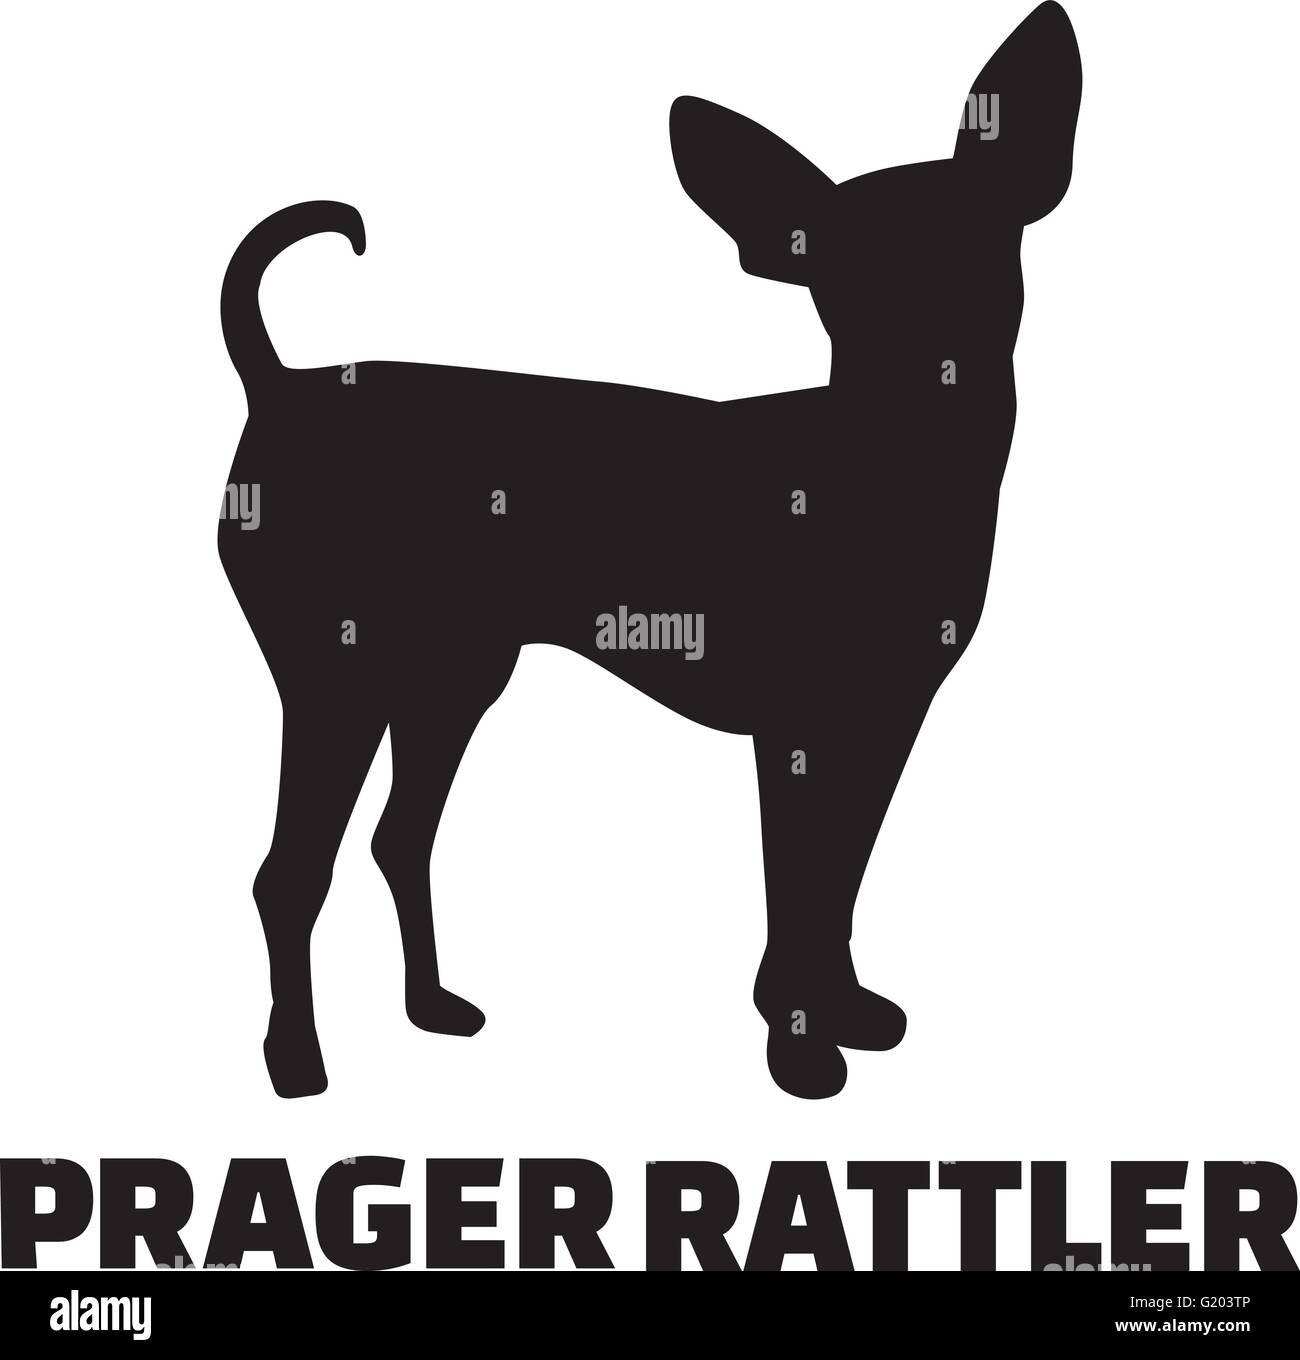 Prague ratter with german breed name Stock Vector